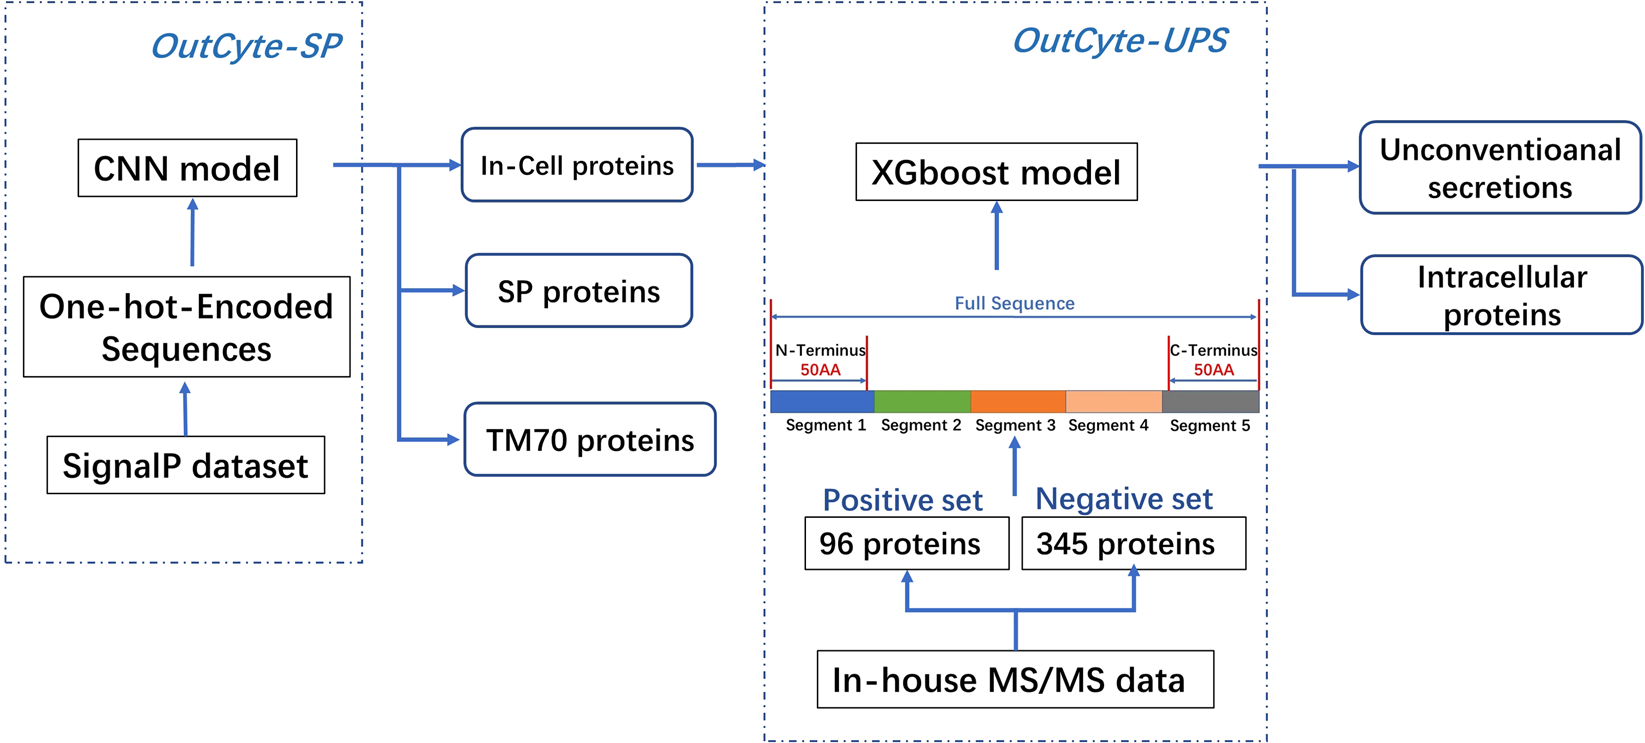 OutCyte: a novel tool for predicting unconventional protein secretion |  Scientific Reports